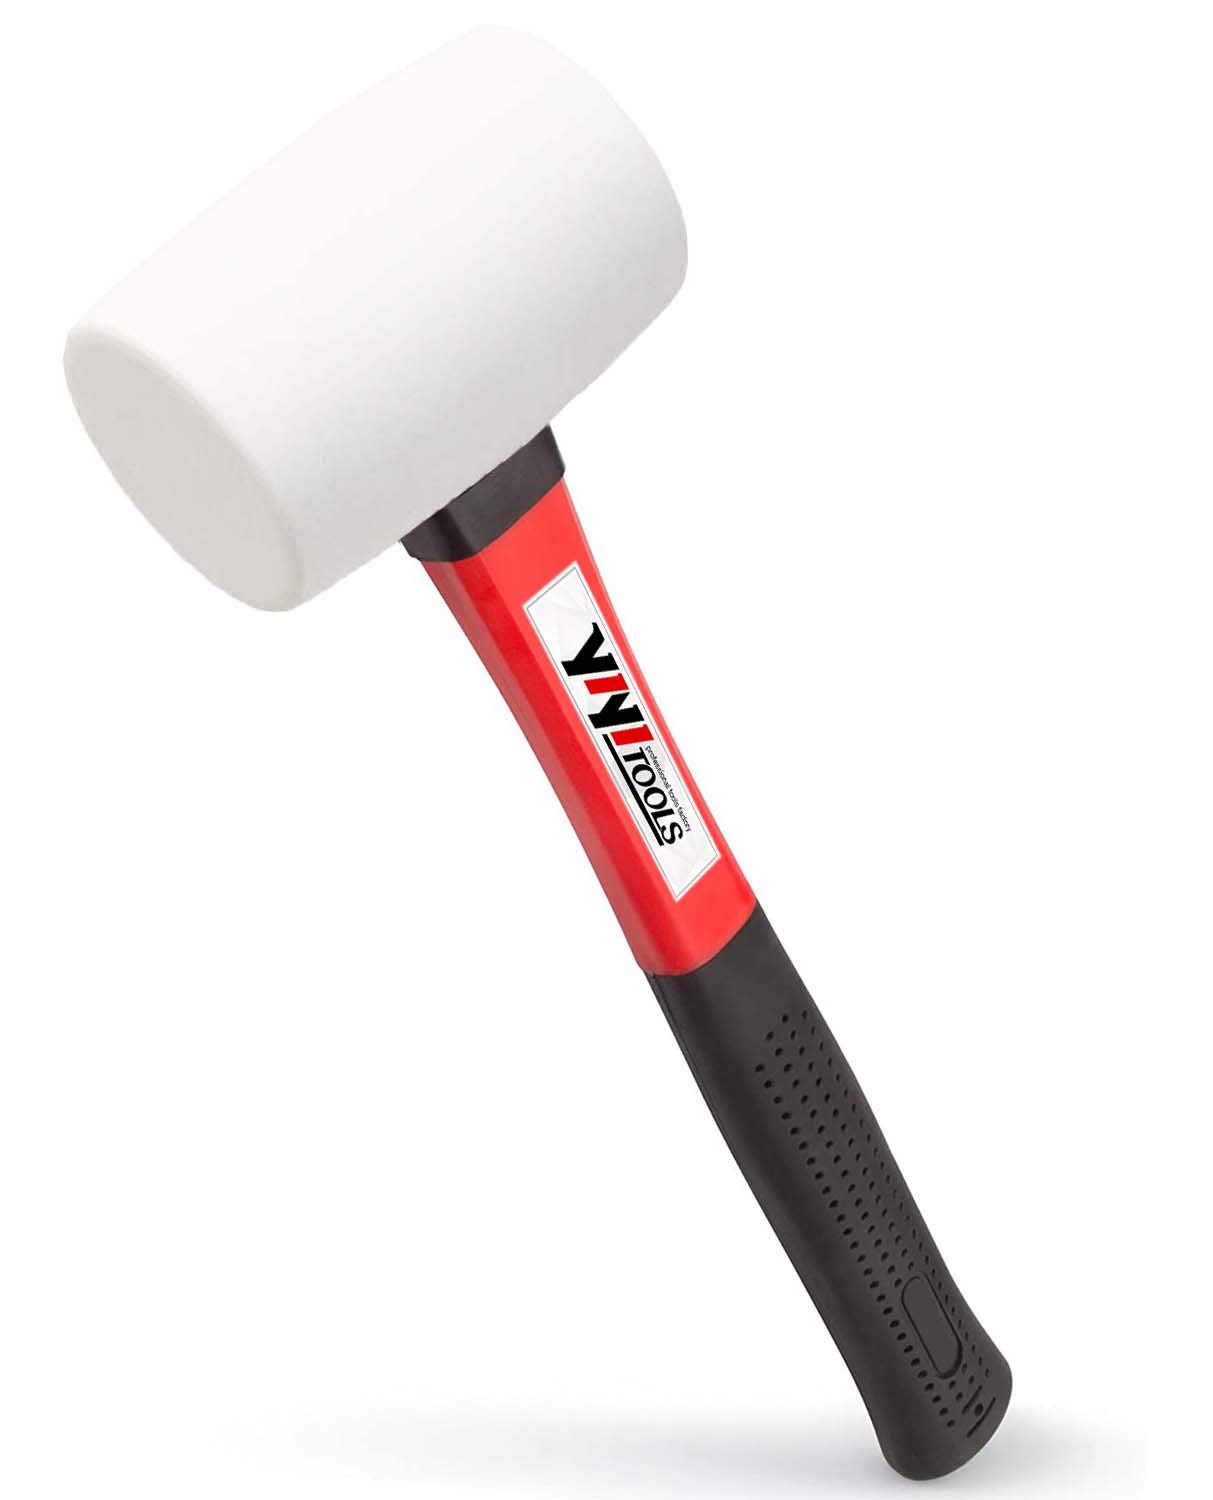 16 oz. YIYITOOLS Rubber Hammer, 16oz rubber mallet With fiberglass Handle (white) $5.80 + Free Shipping w/ Prime or on $35+